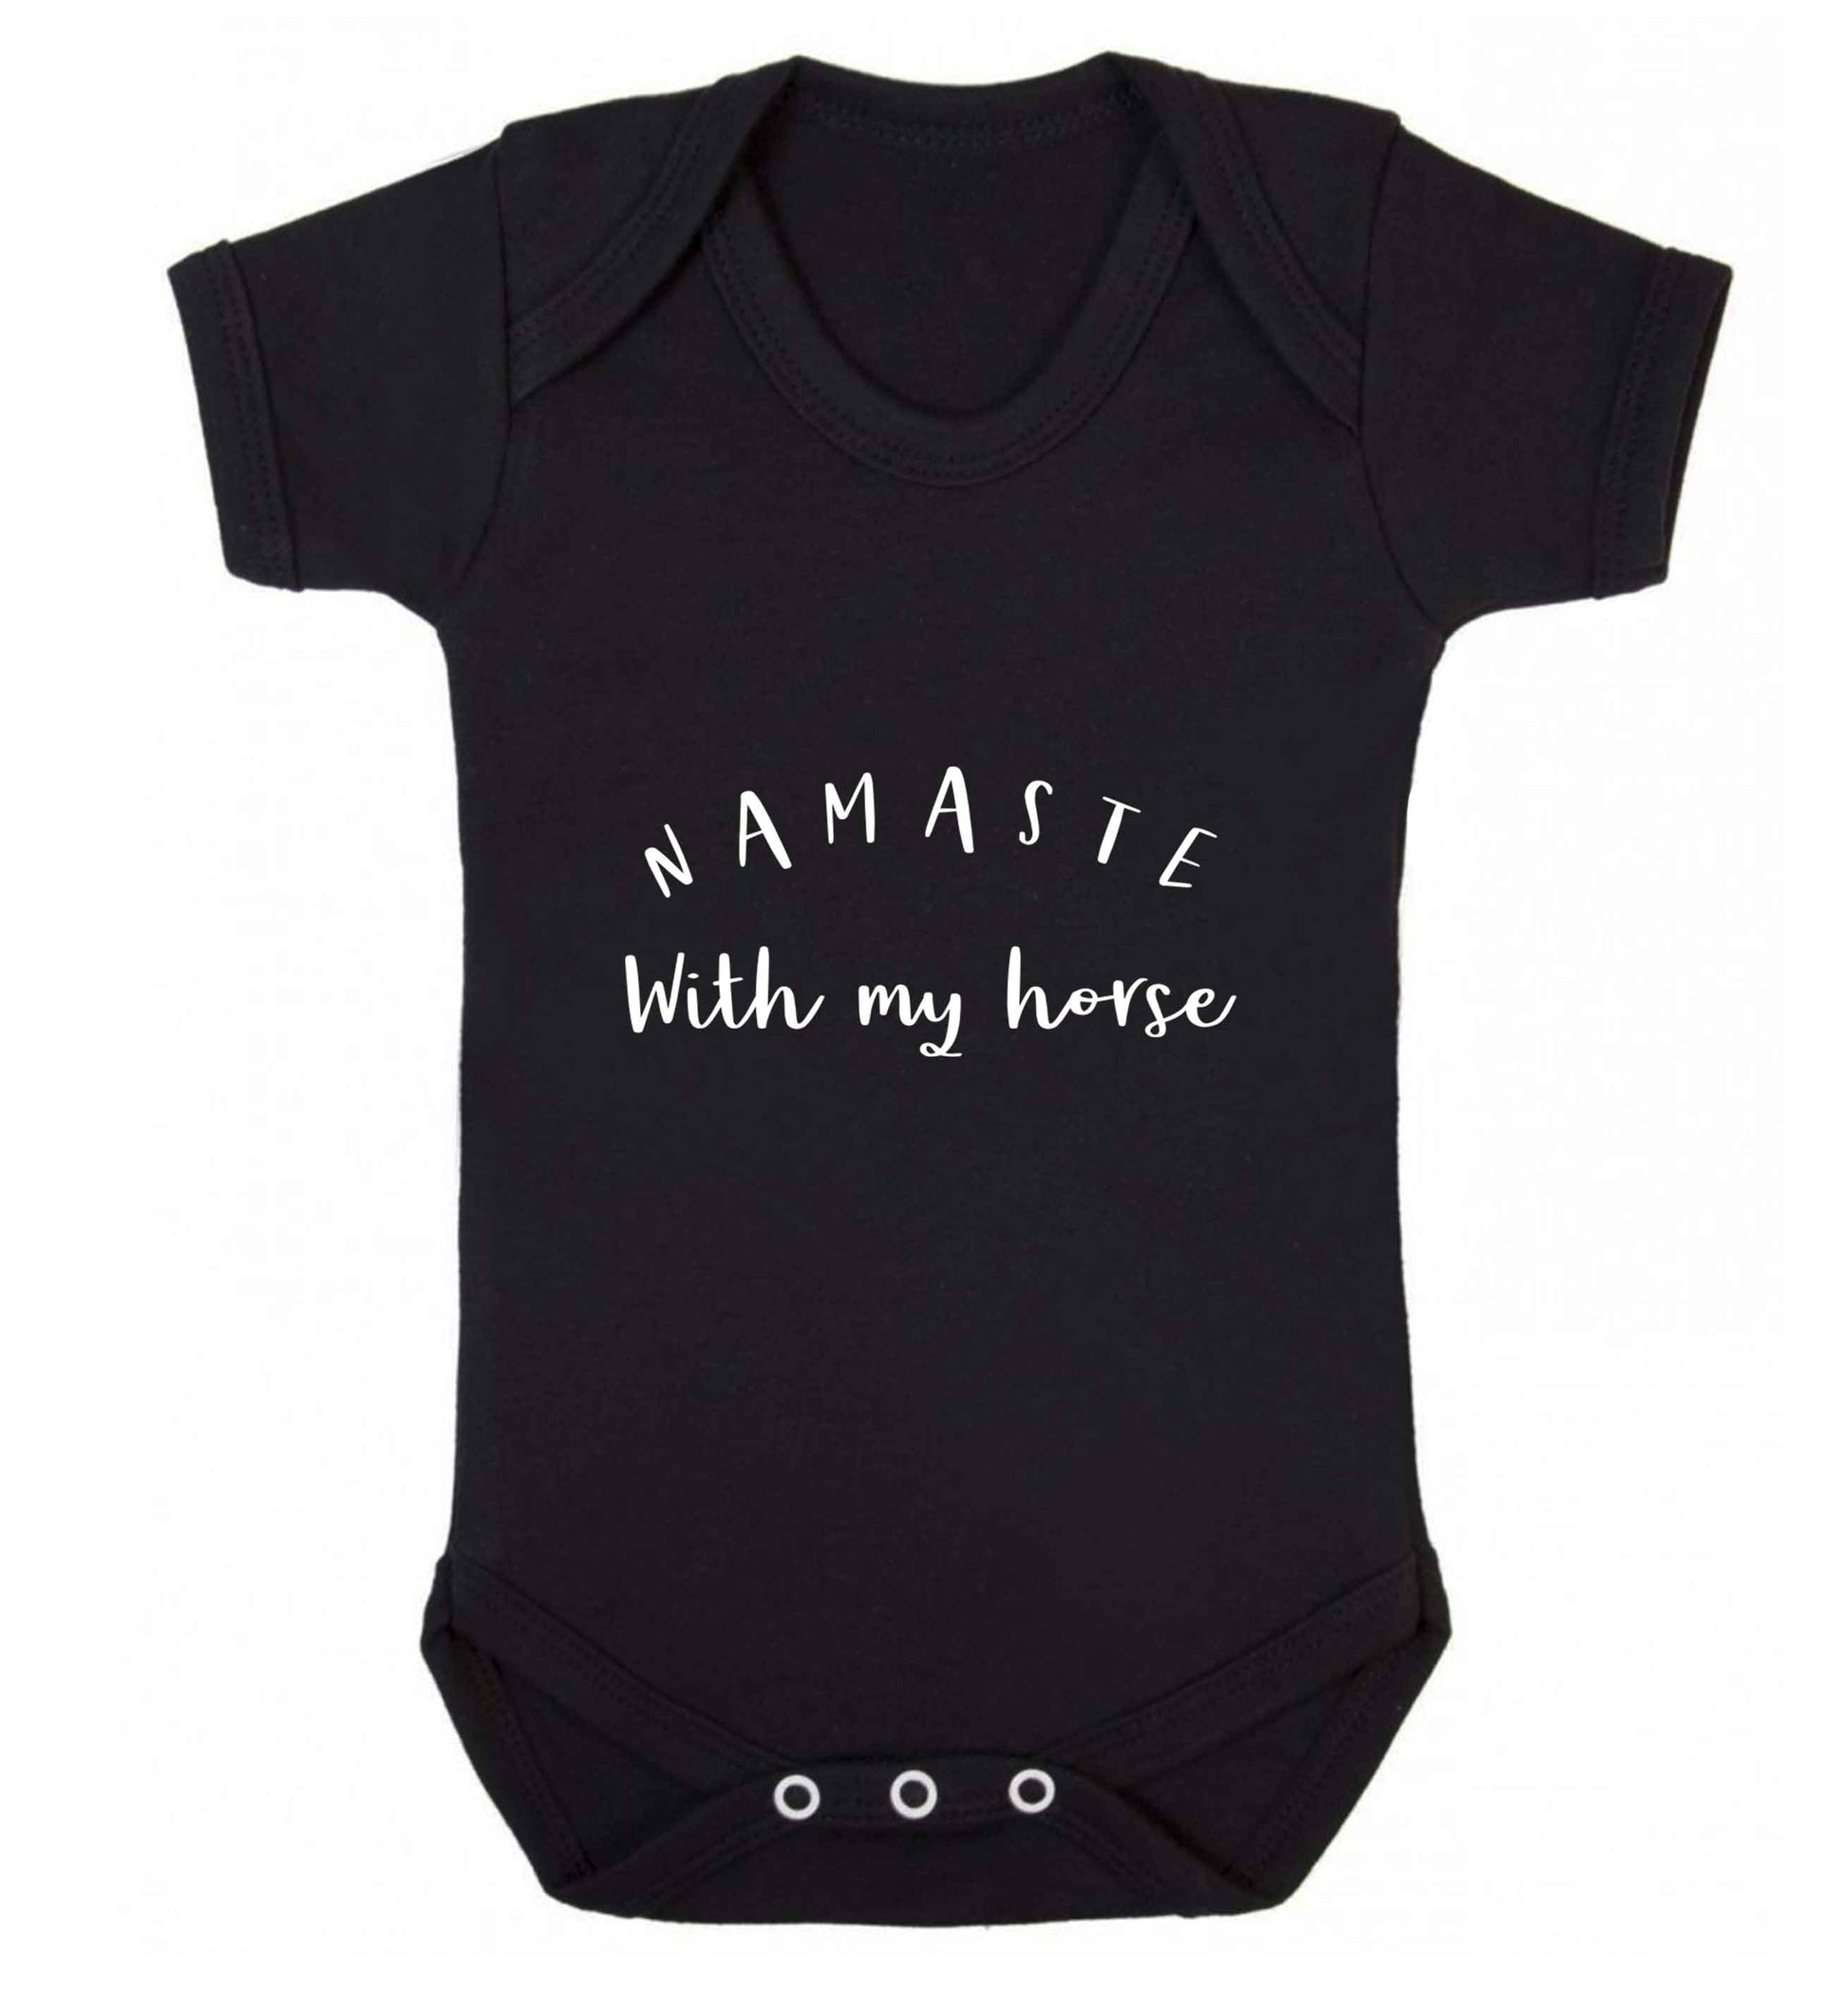 Namaste with my horse baby vest black 18-24 months